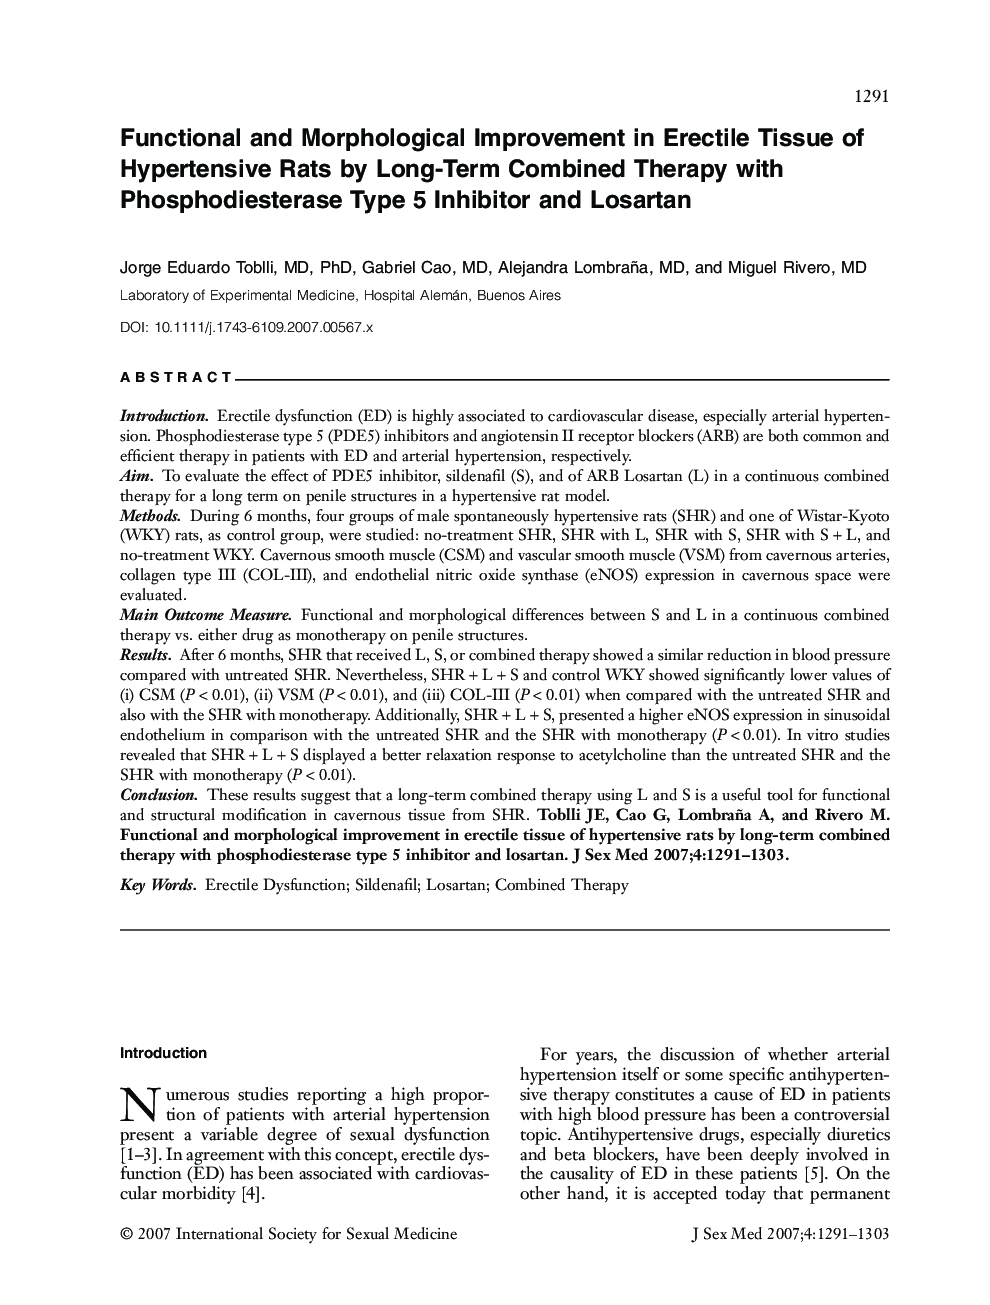 Functional and Morphological Improvement in Erectile Tissue of Hypertensive Rats by Long-Term Combined Therapy with Phosphodiesterase Type 5 Inhibitor and Losartan